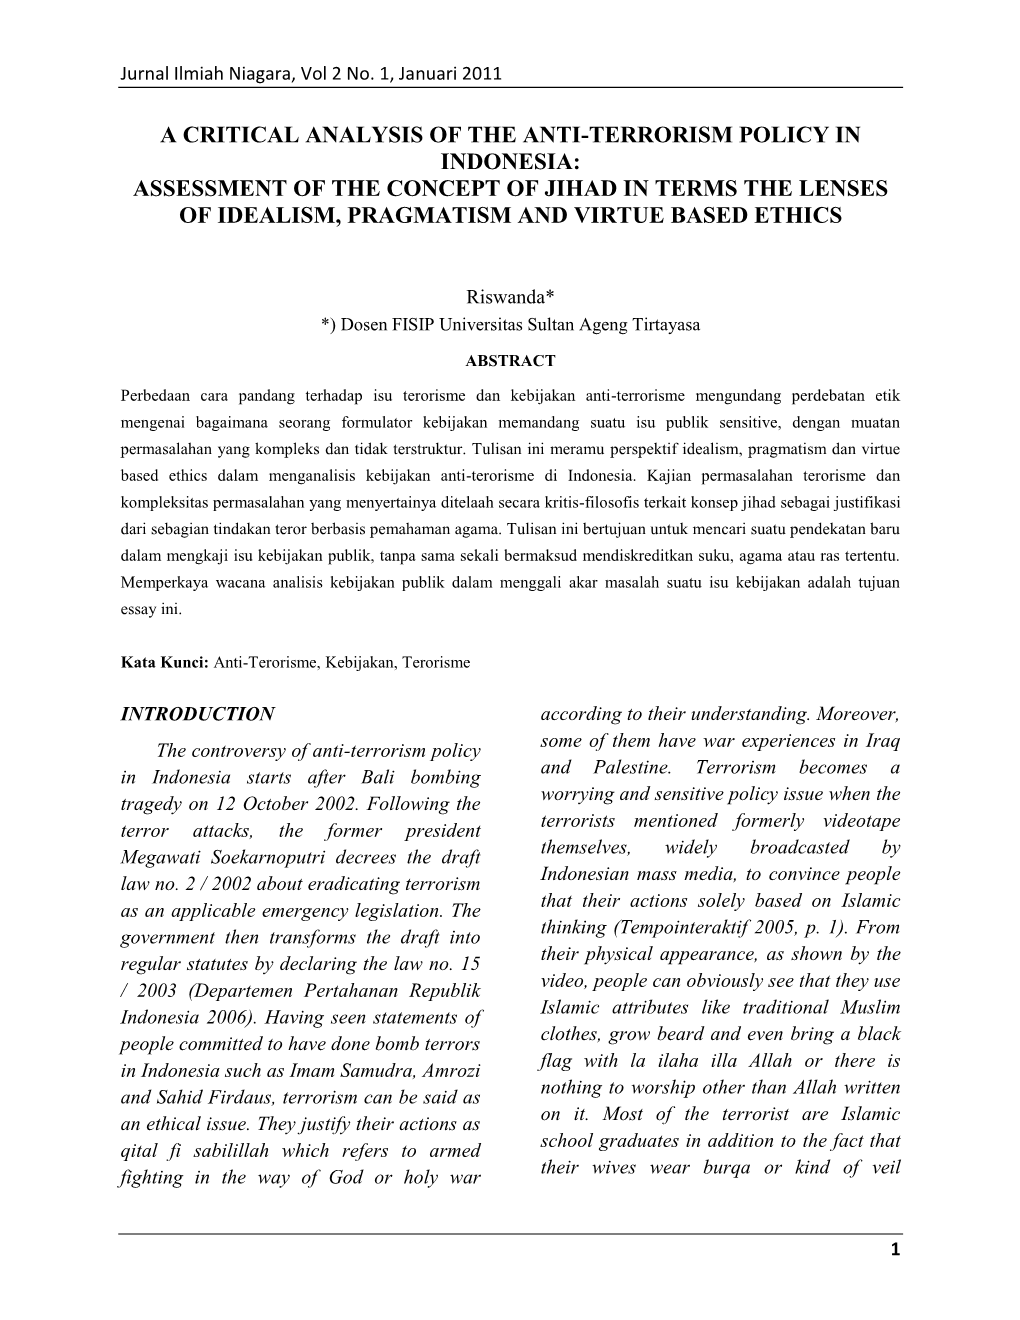 A Critical Analysis of the Anti-Terrorism Policy in Indonesia: Assessment of the Concept of Jihad in Terms the Lenses of Idealism, Pragmatism and Virtue Based Ethics